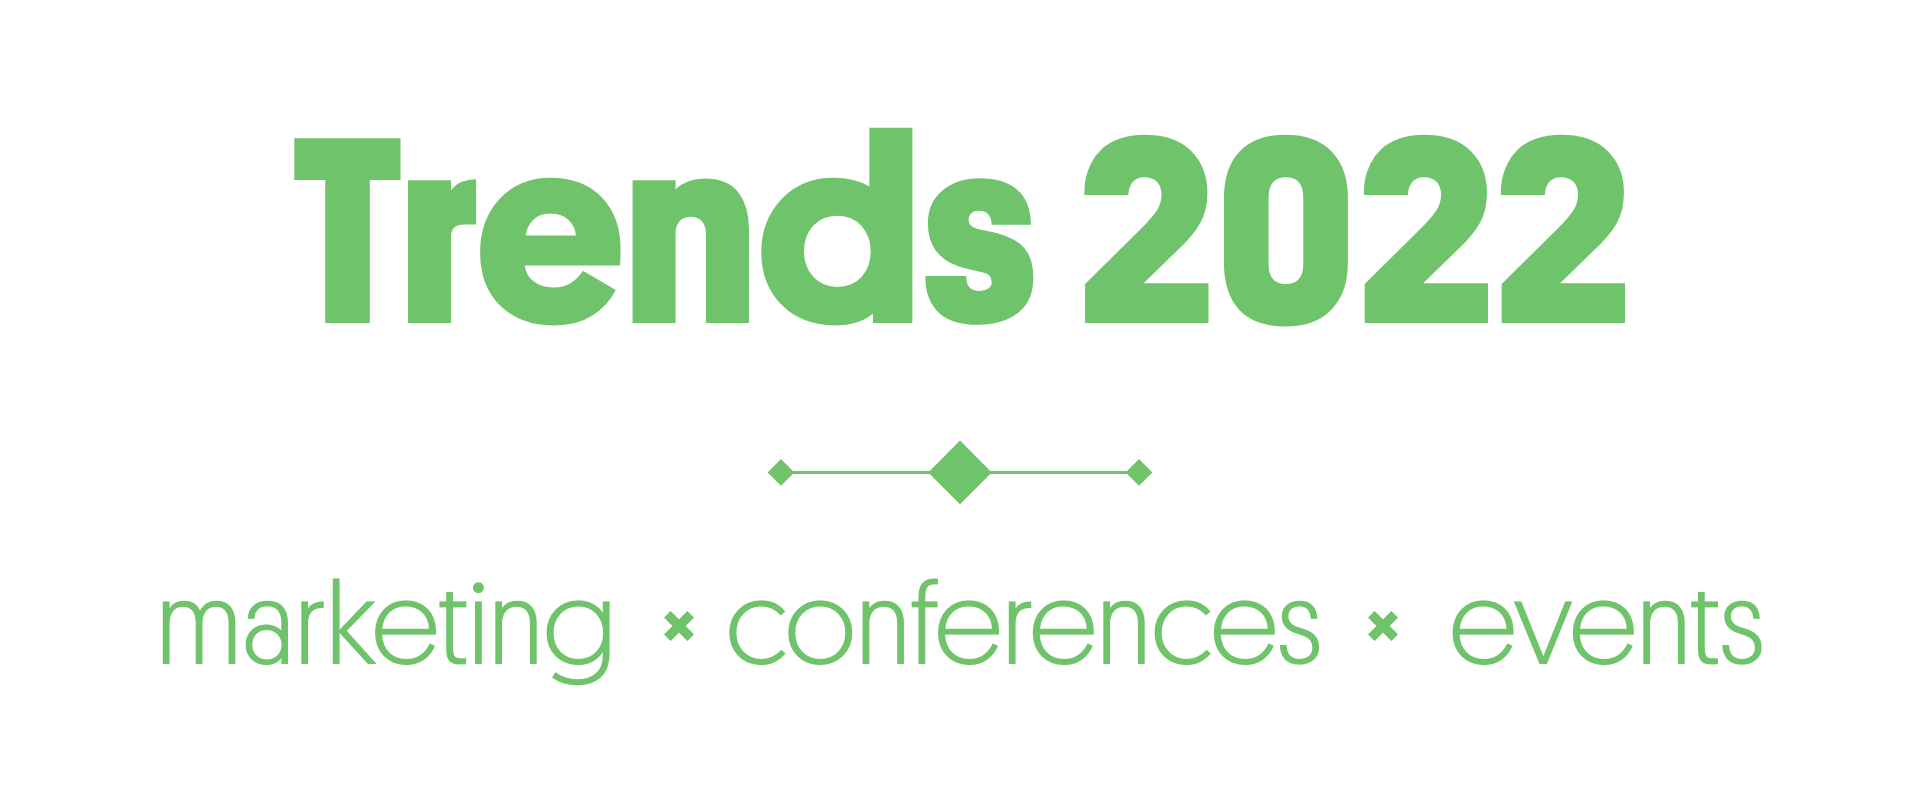 2022 trends: marketing, conferences, events